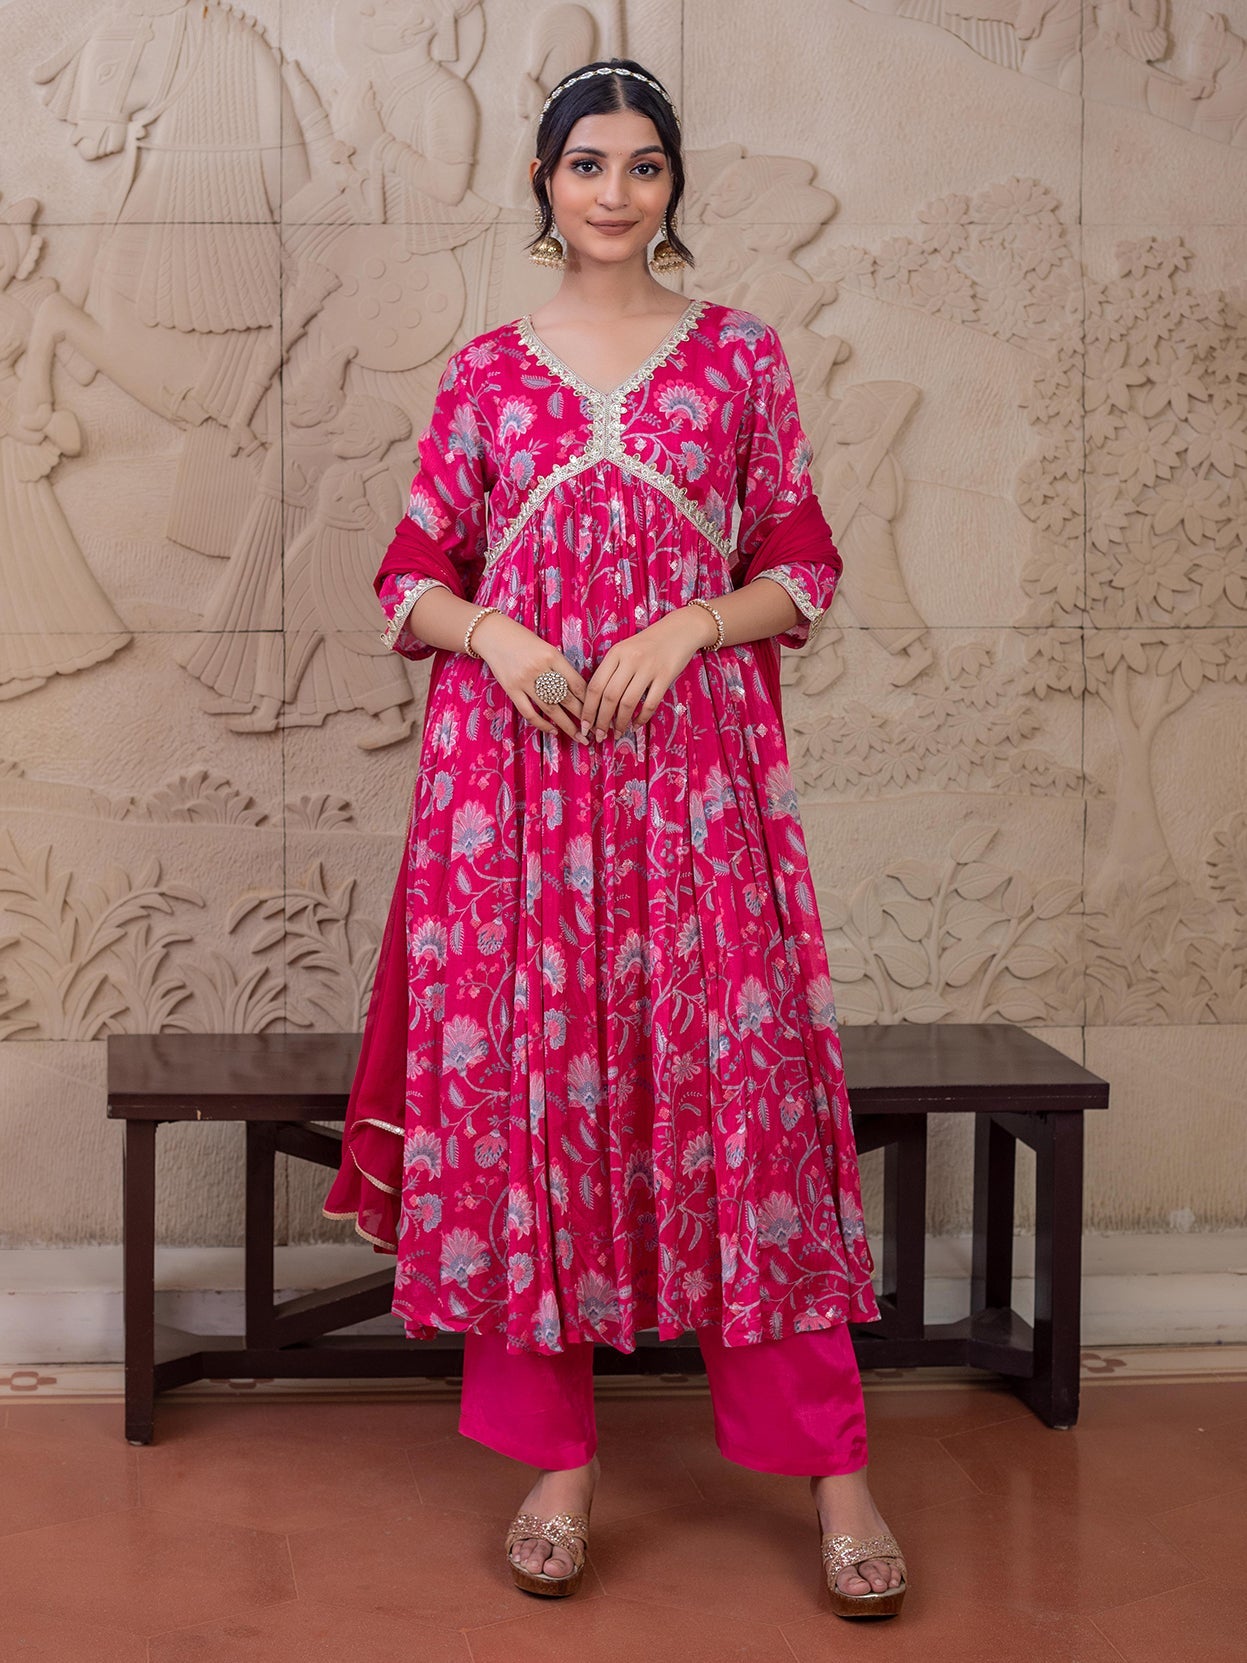 step-into-grace-with-our-pink-floral-jaal-printed-kurta-set-a-blend-of-delicate-florals-and-intricate-design-this-set-exudes-timeless-elegance-perfect-for-those-who-appreciate-beauty-in-simplicity